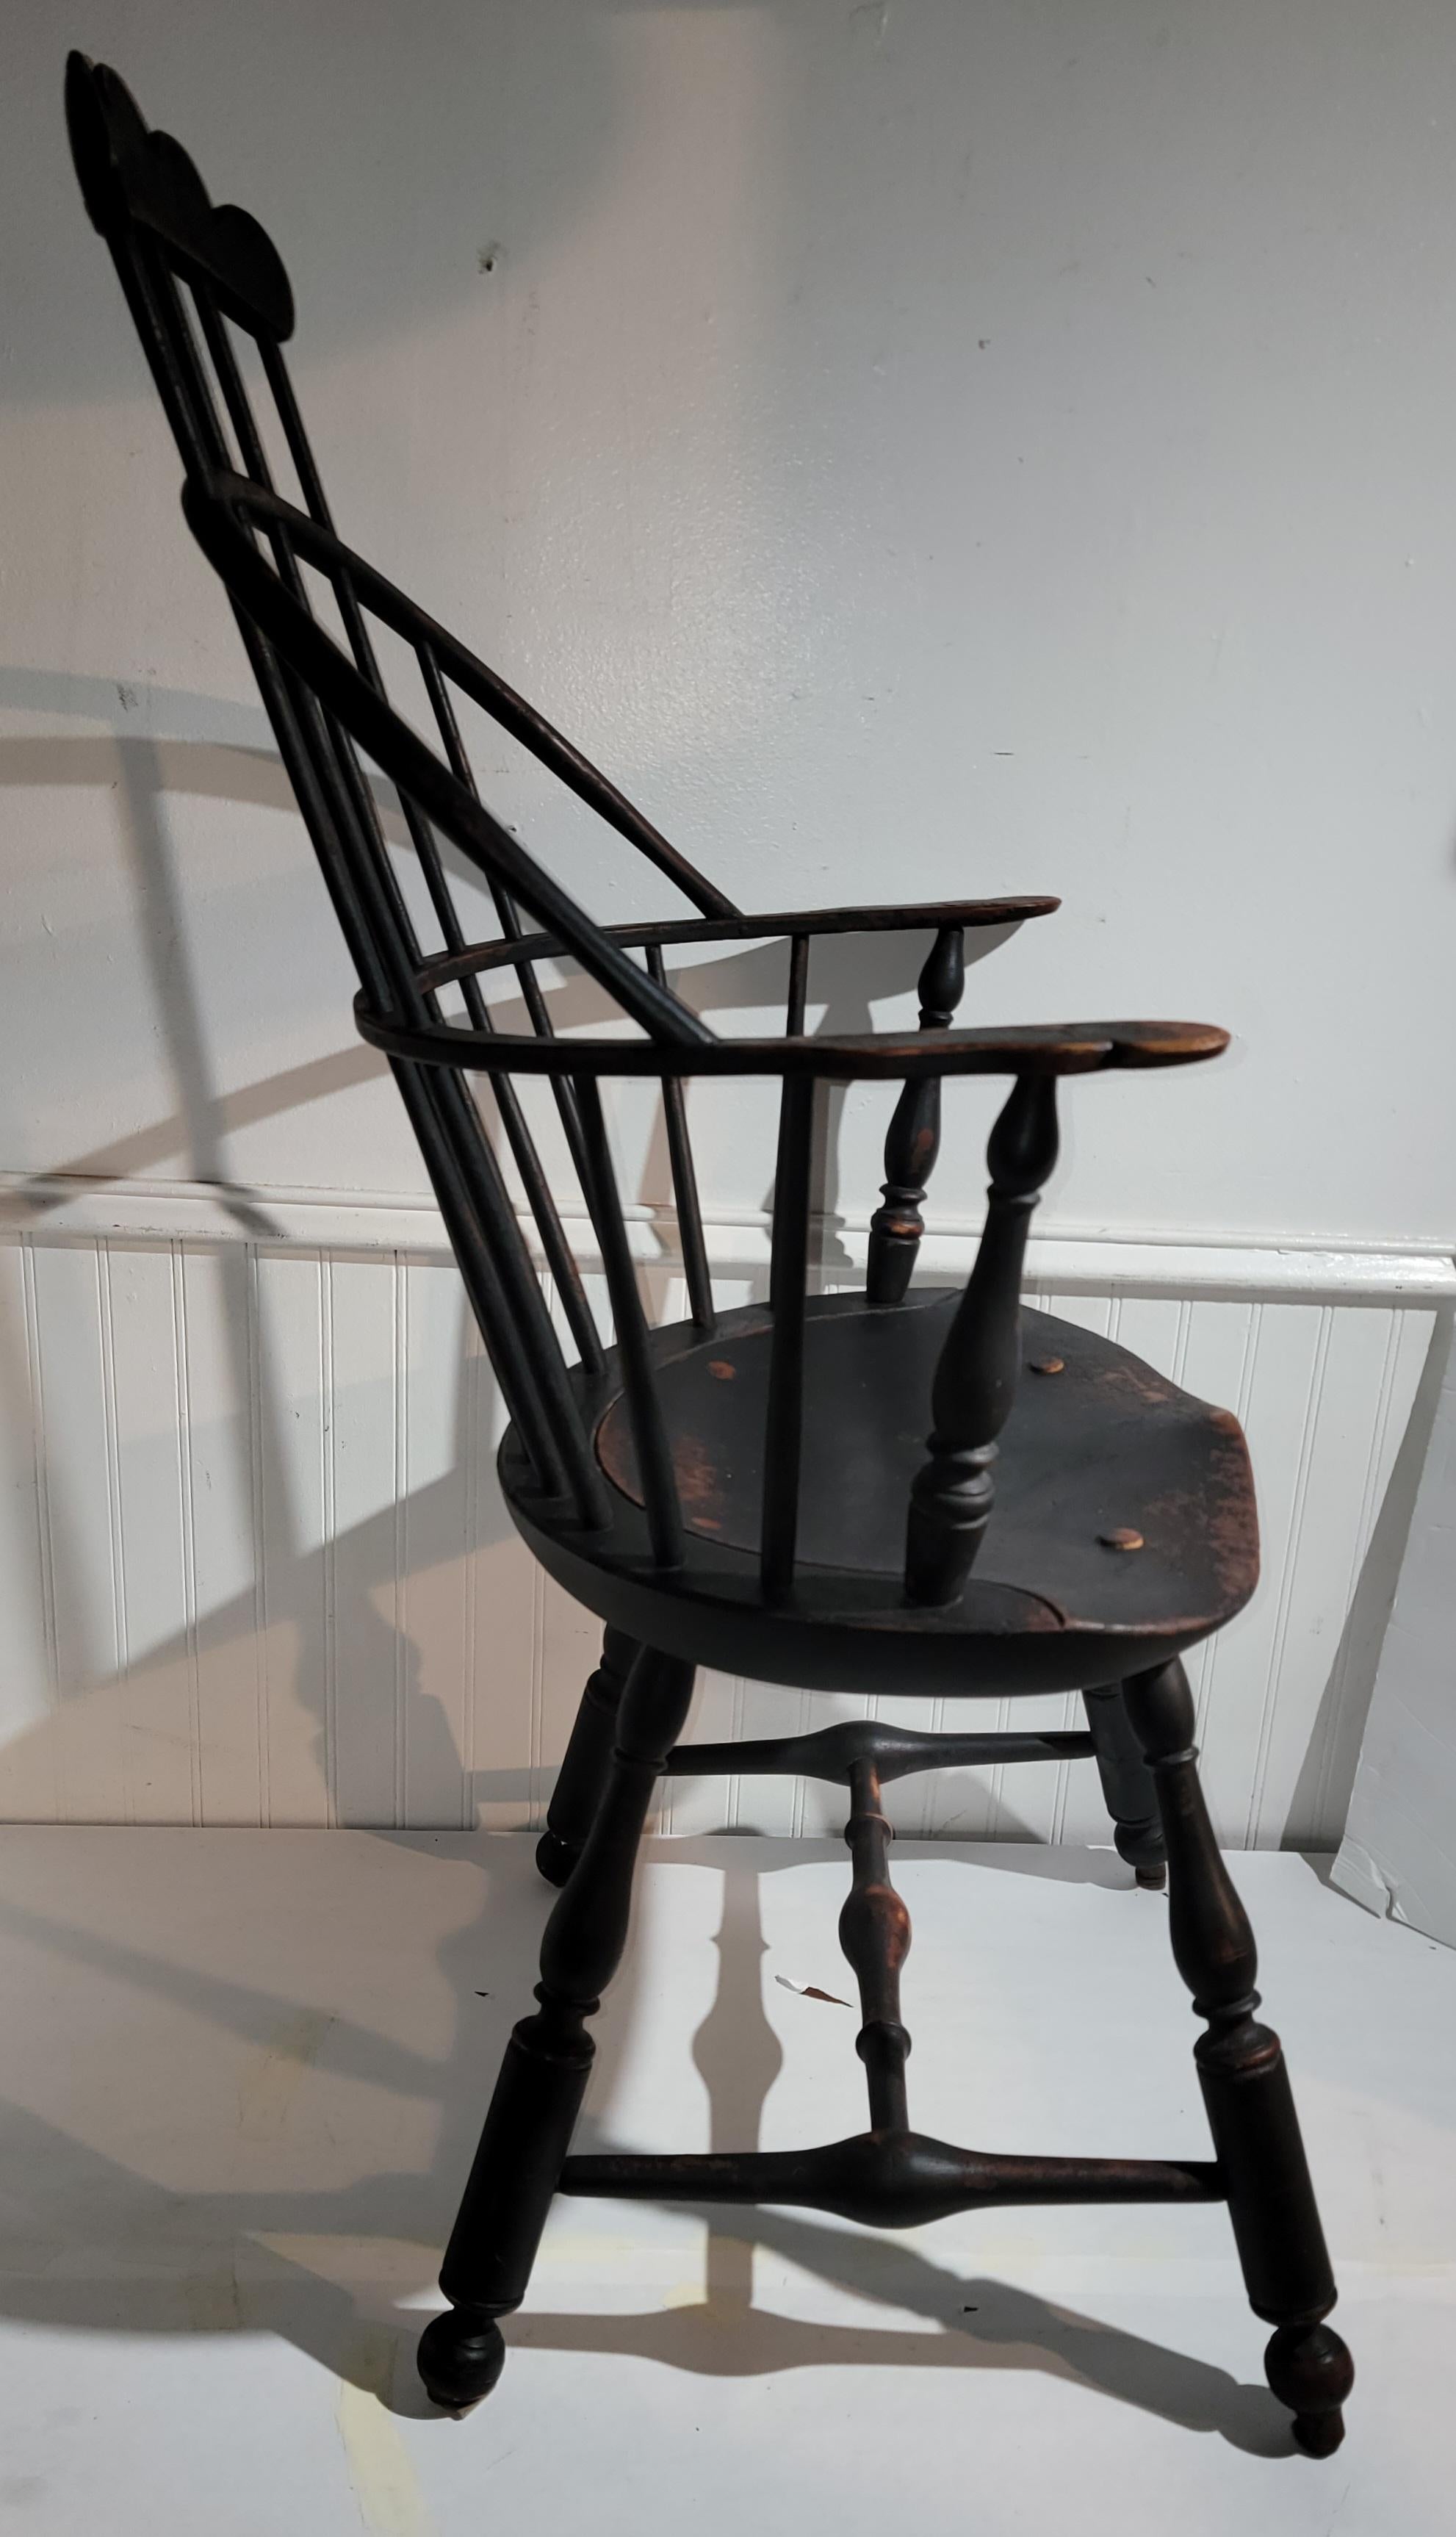 reproduction windsor chairs for sale